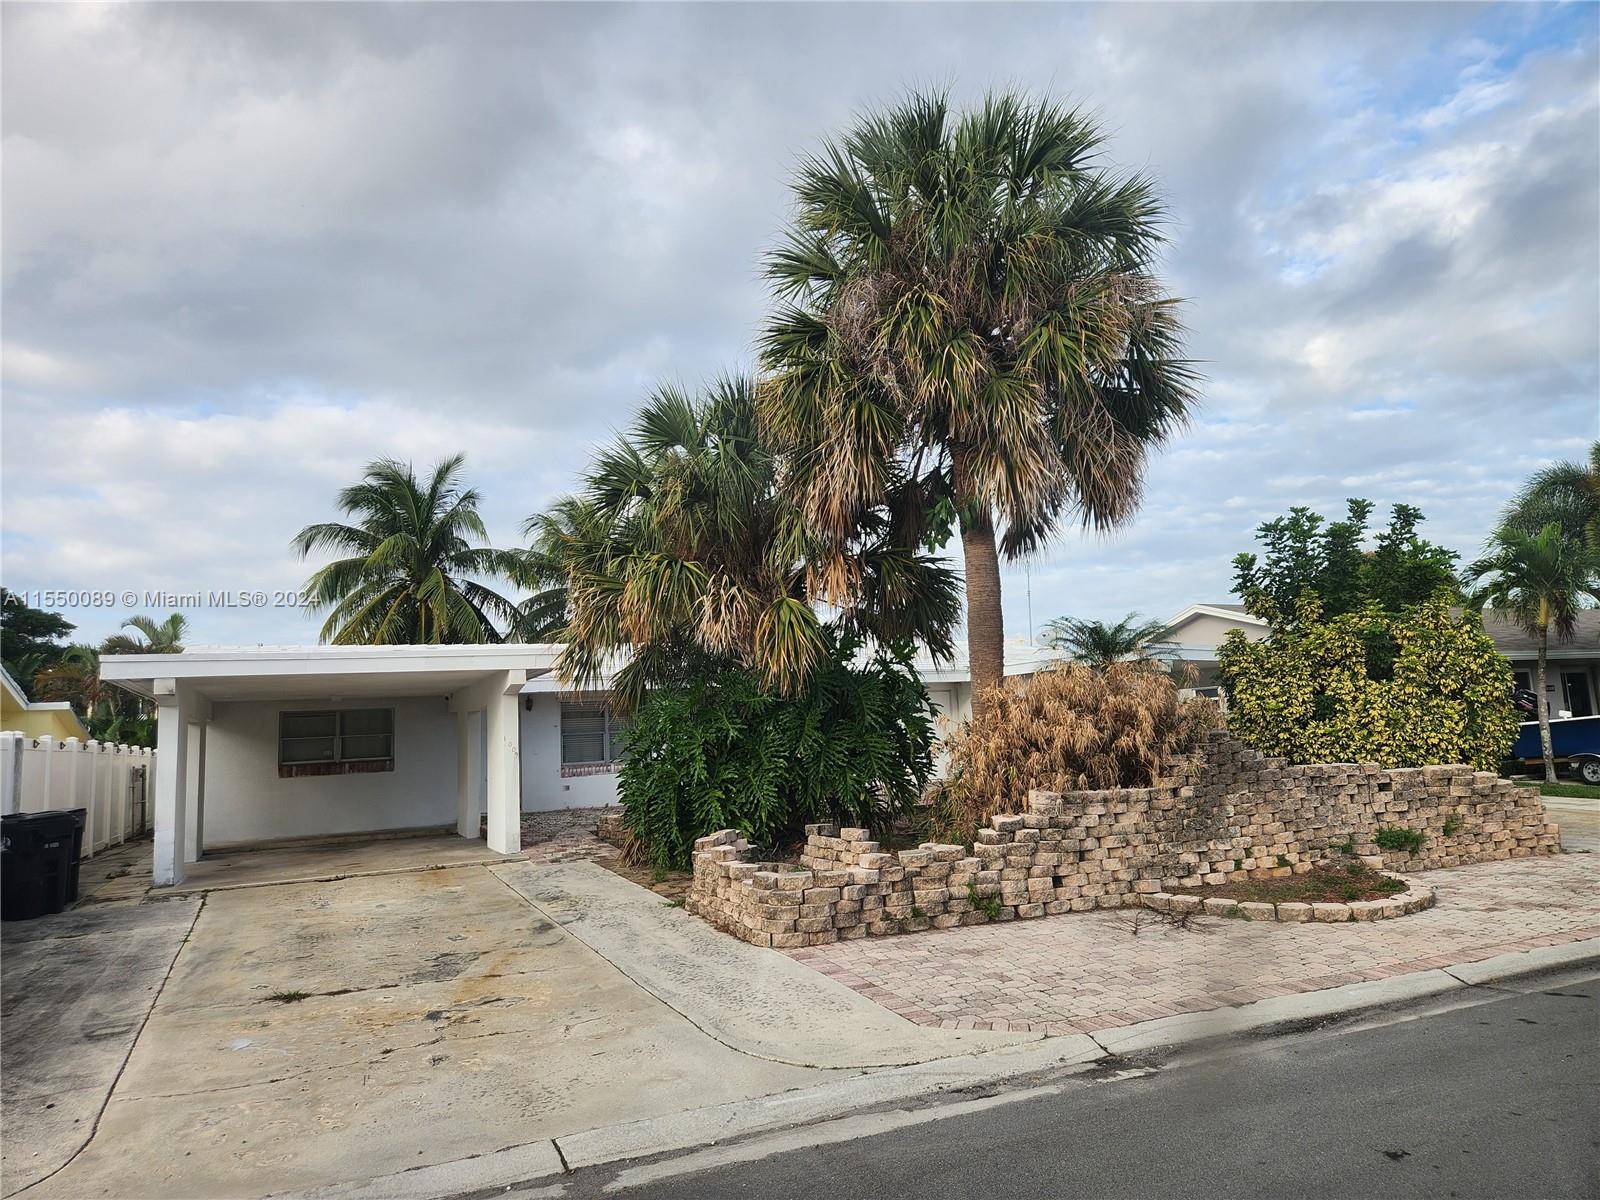 RARE DUPLEX FIXXER UPPER ON WIDEST DEEPEST CANAL IN AREA OF CANALS W THE ONLY EAST END BIG TURNING POOL FOR BIG BOATS YACHTS TALL SAILBOATS DEEP KEELS DAVIE BLVD ...